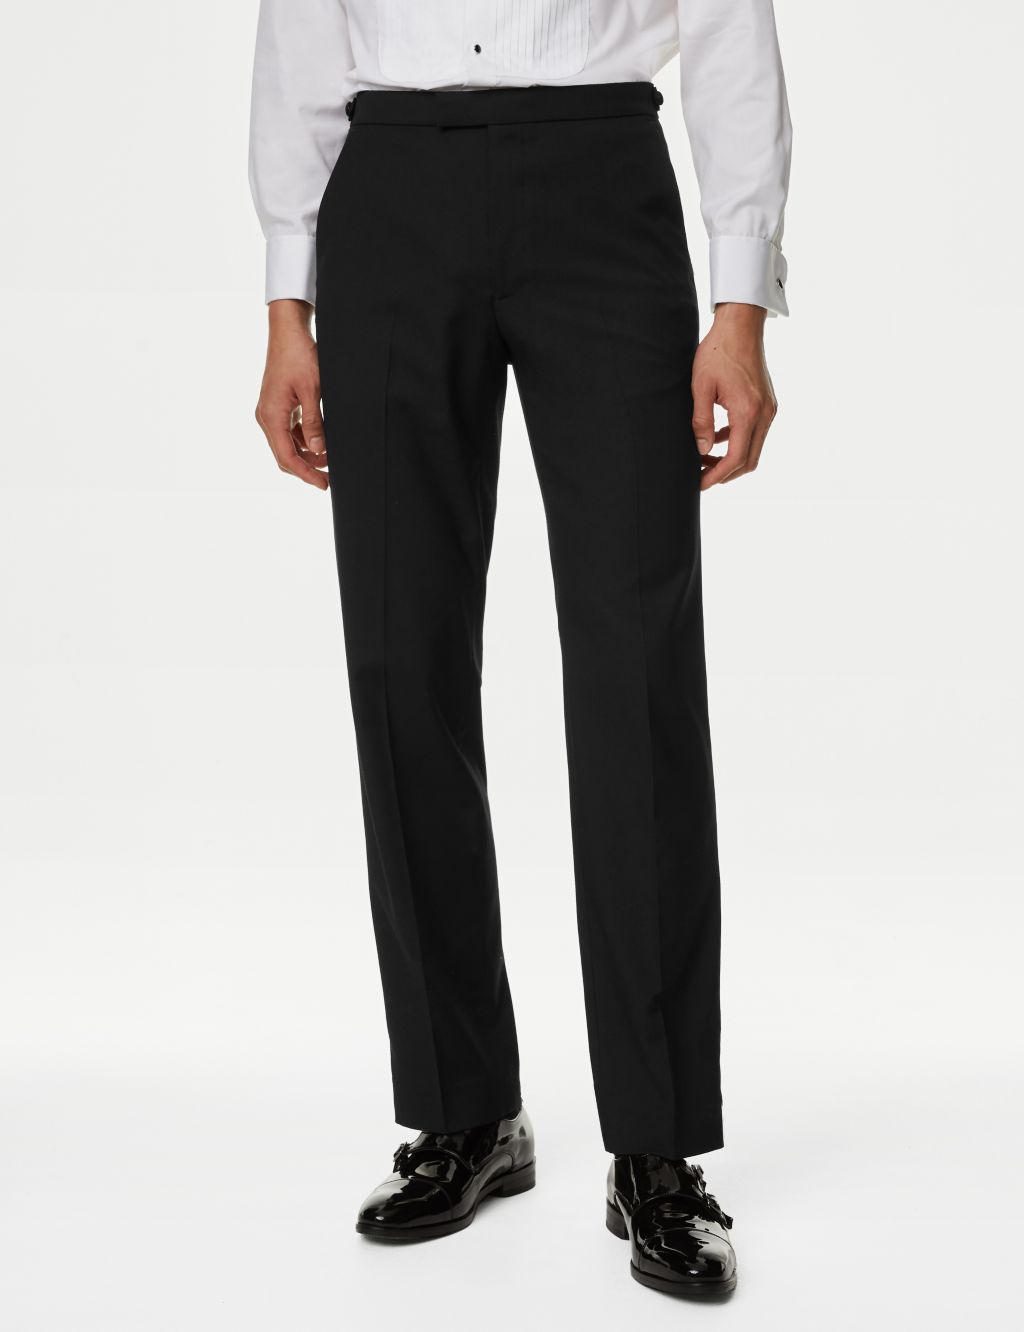 Regular Fit Stretch Tuxedo Trousers image 3